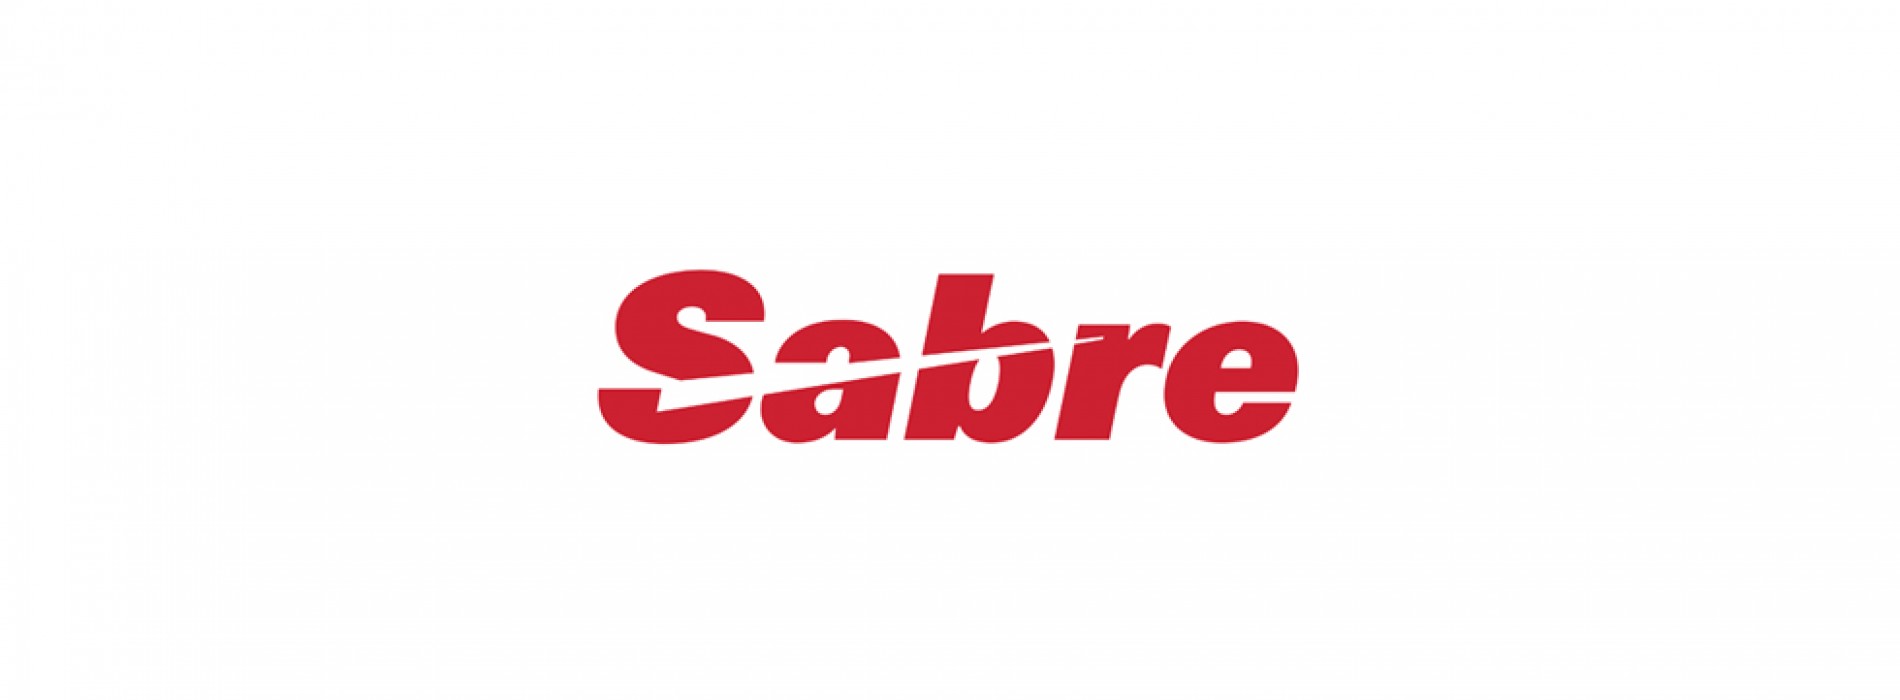 Sabre expands presence in Mongolia through new distribution agreement